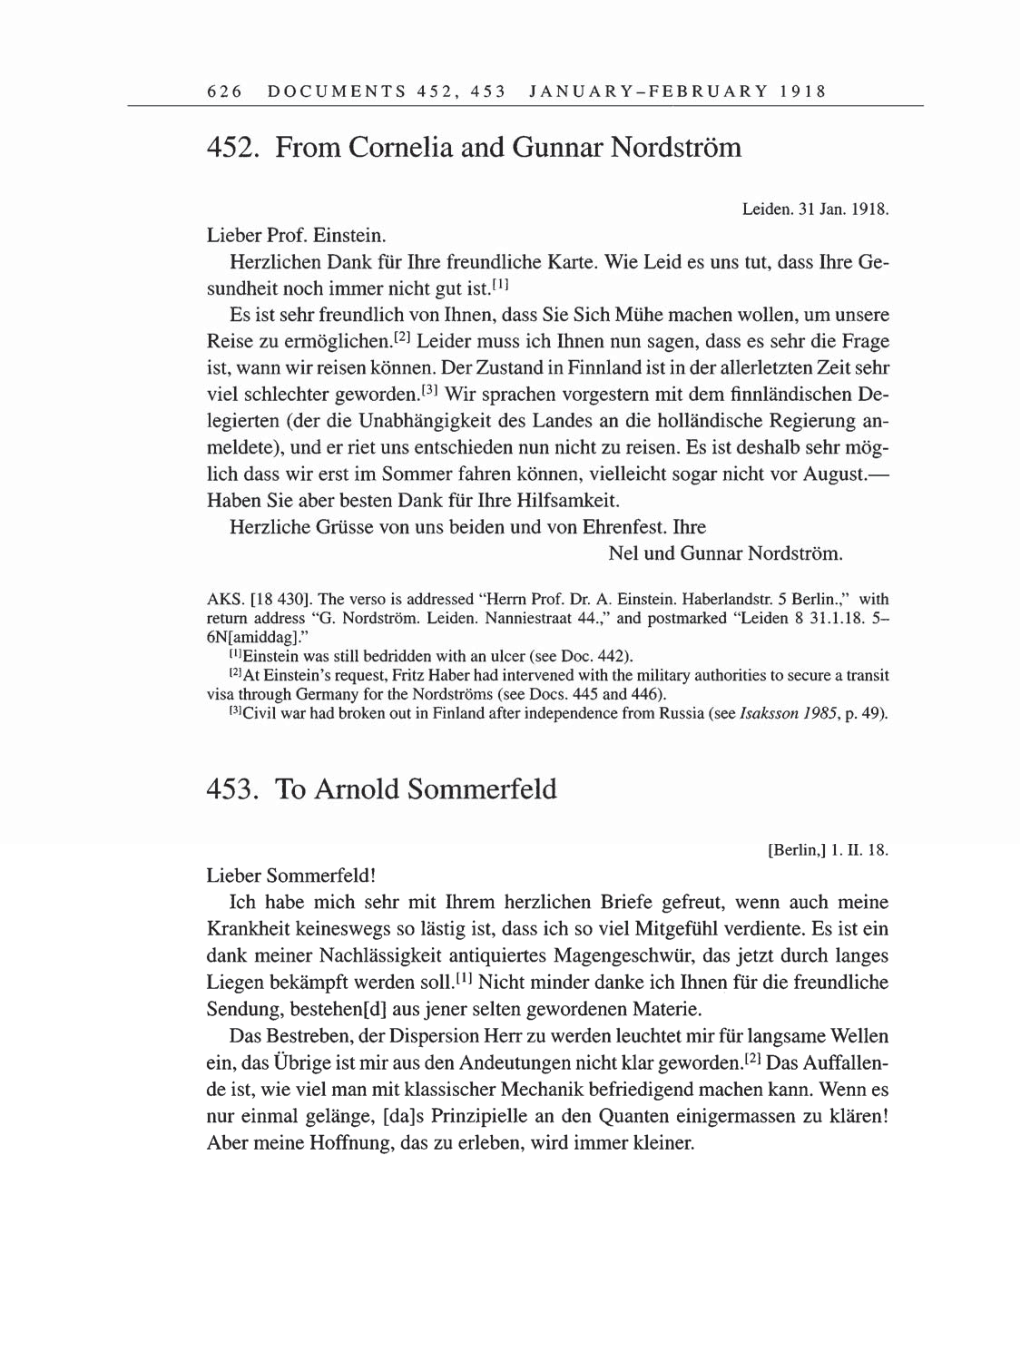 Volume 8, Part B: The Berlin Years: Correspondence 1918 page 626